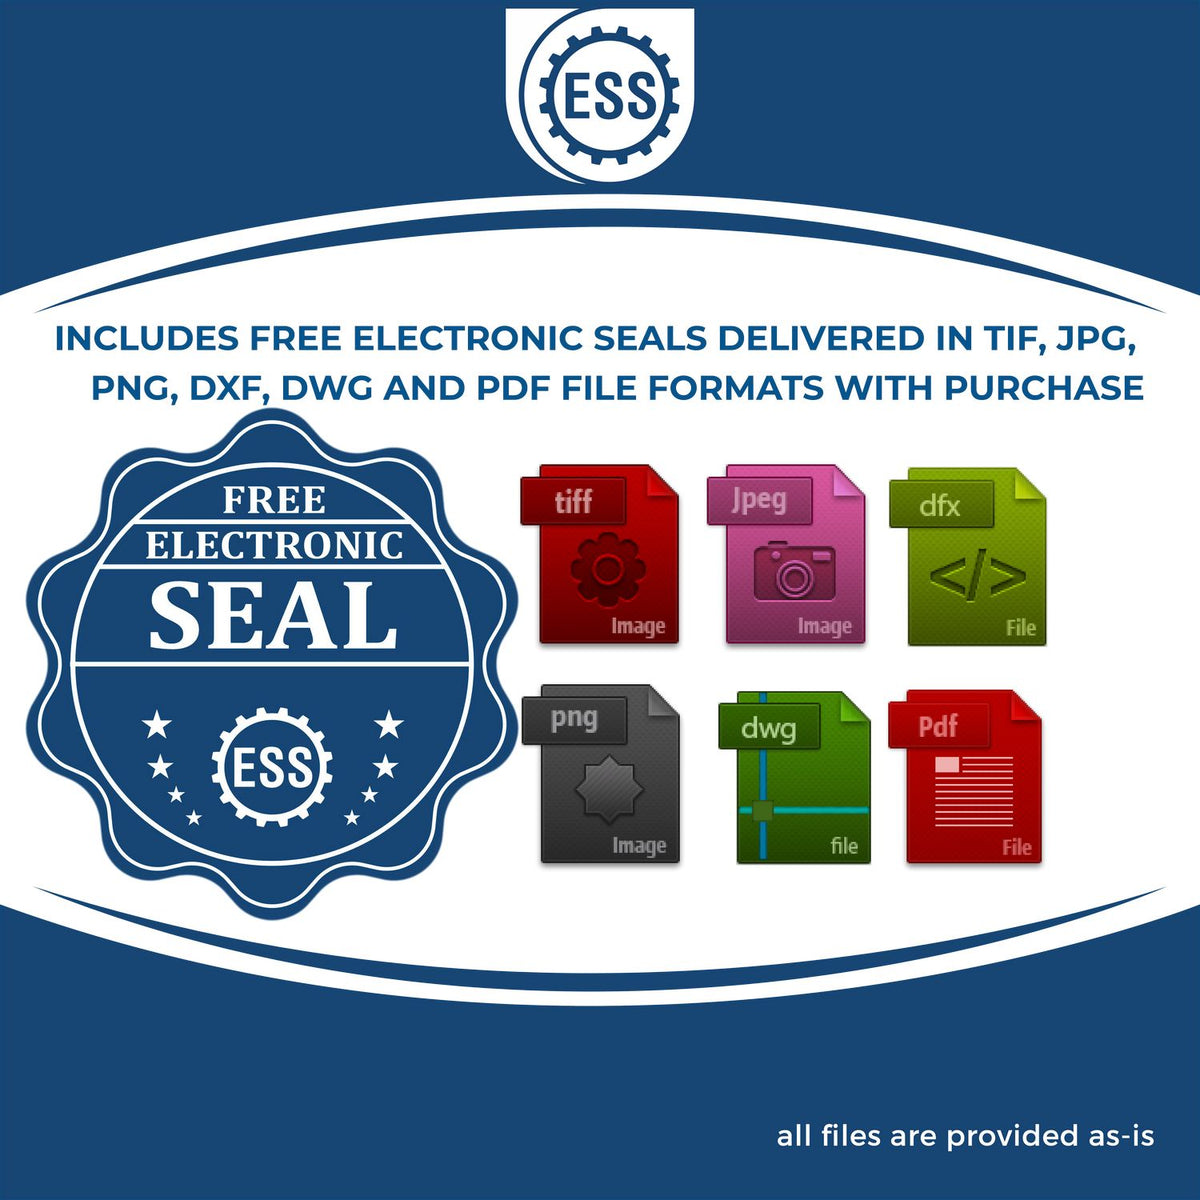 An infographic for the free electronic seal for the Long Reach Montana PE Seal illustrating the different file type icons such as DXF, DWG, TIF, JPG and PNG.